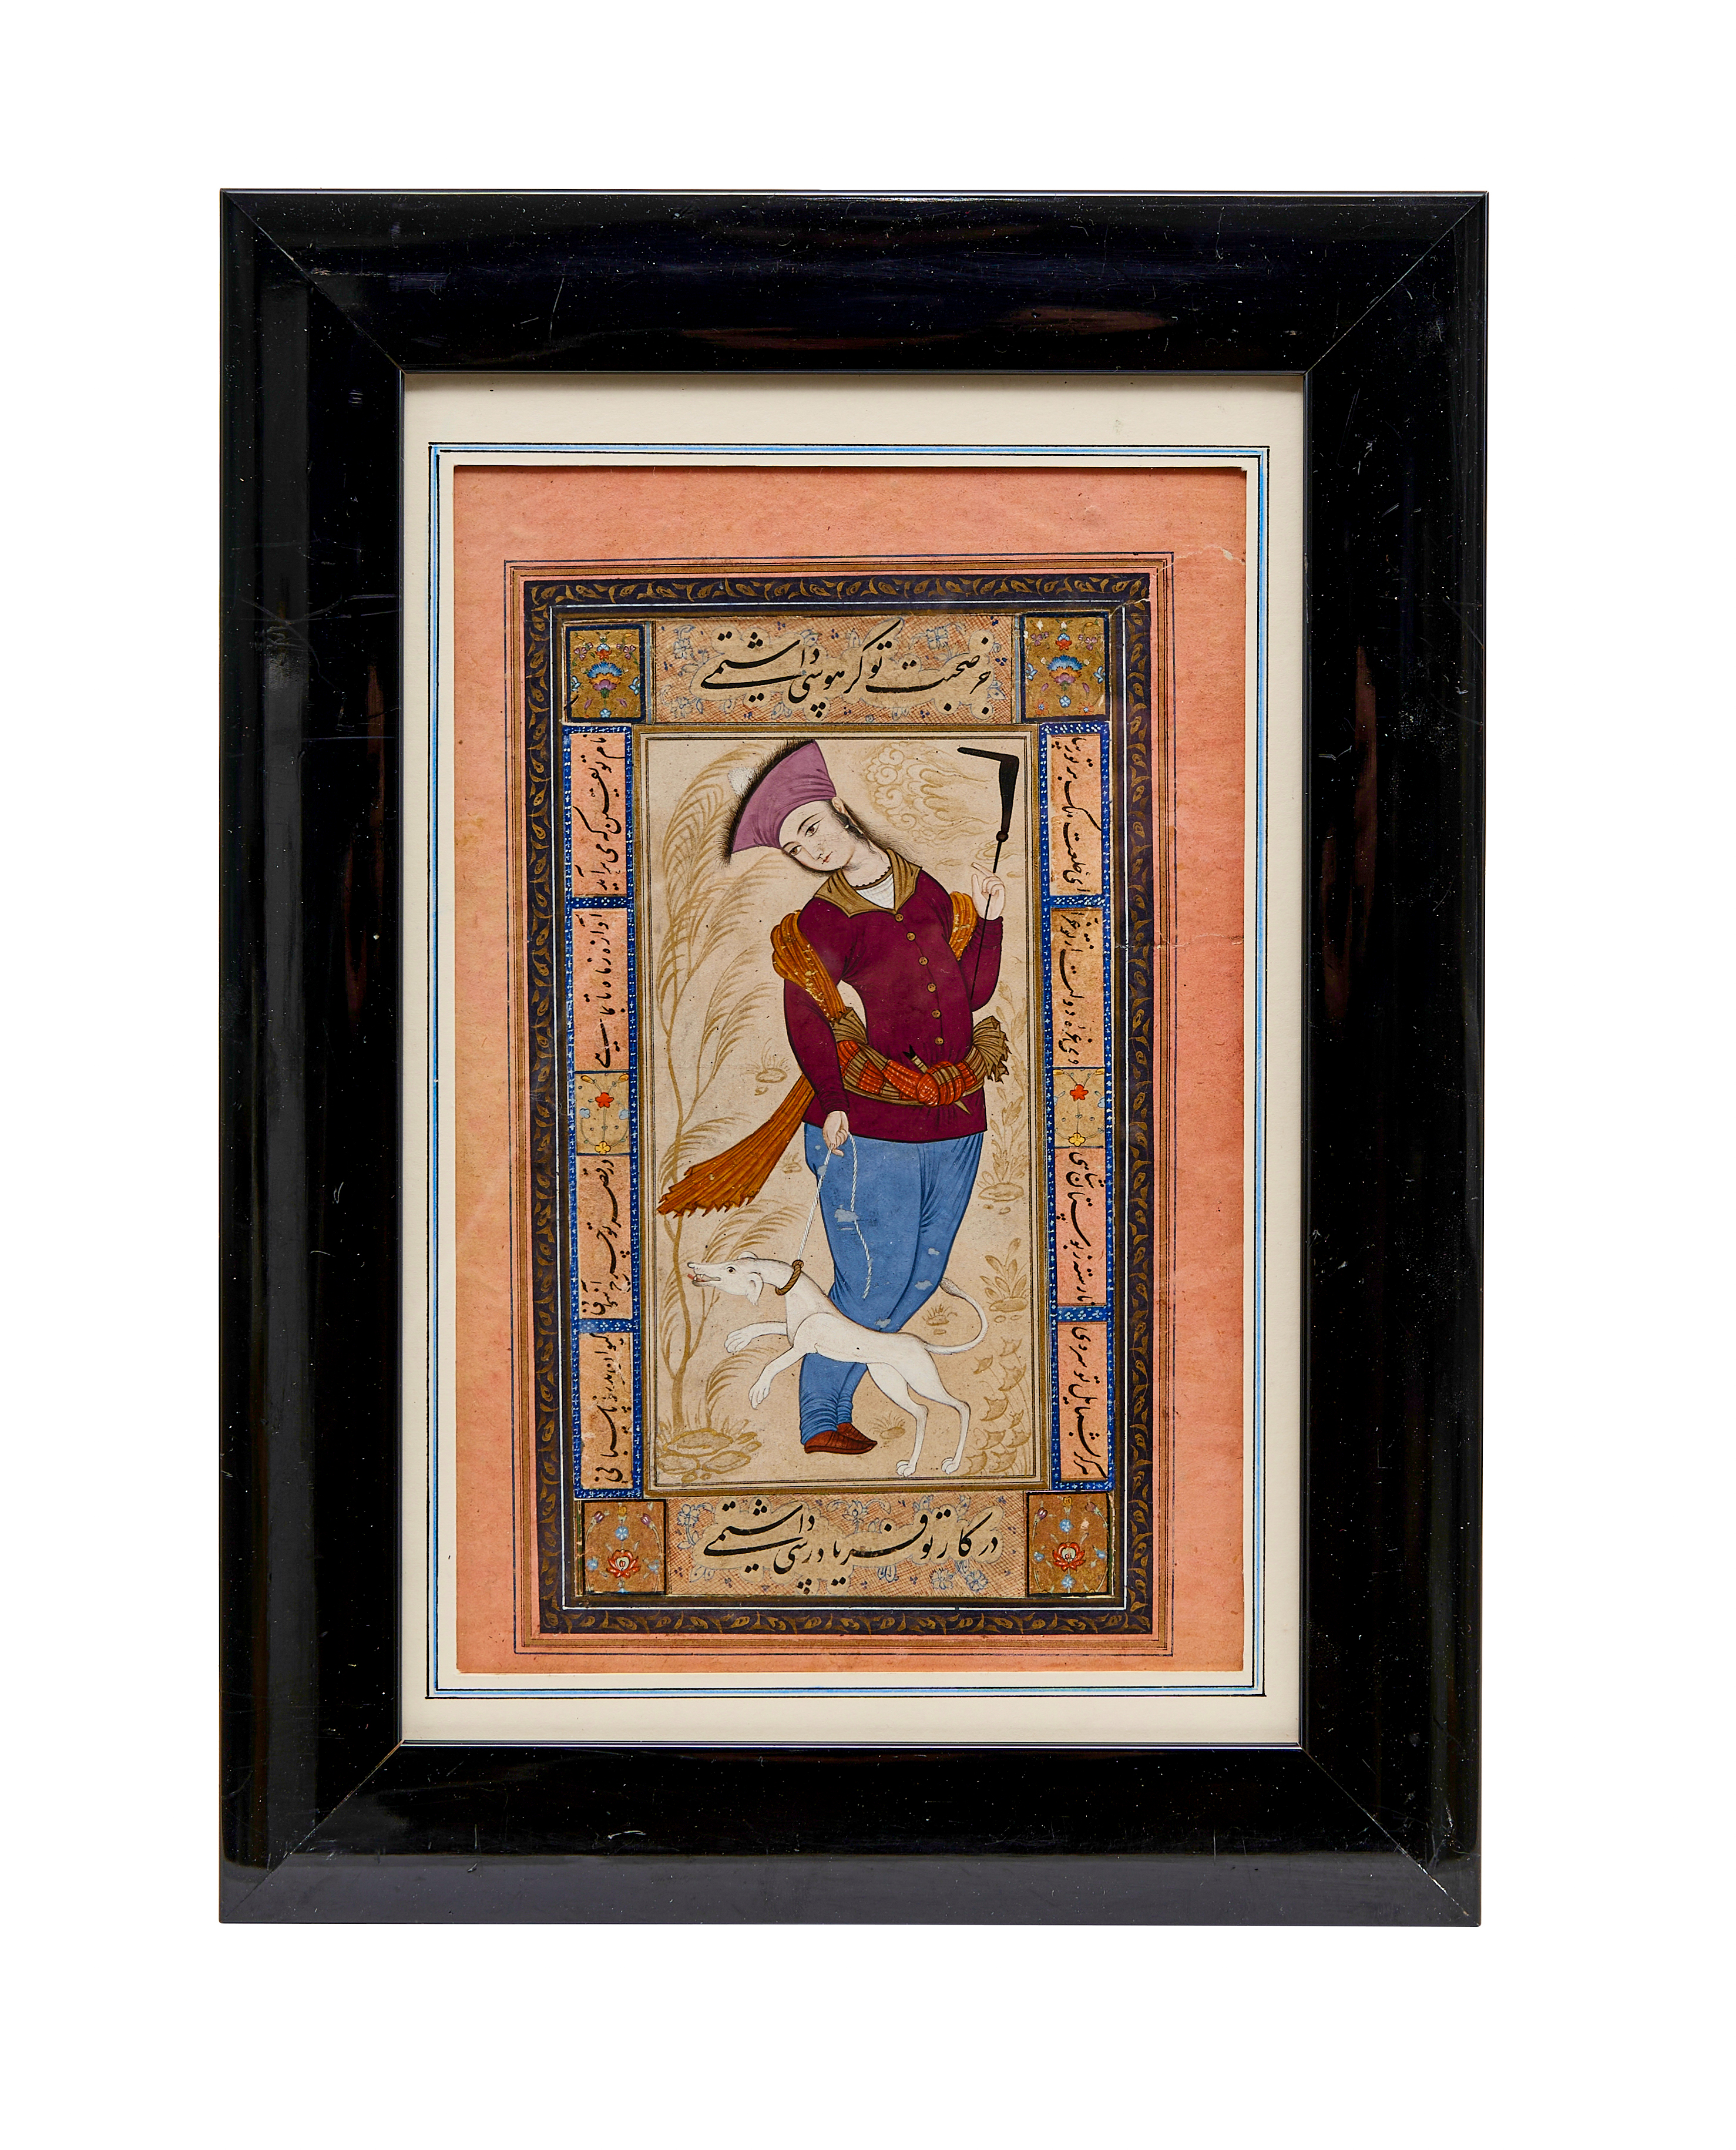 A PERSIAN MINIATURE OF A YOUTH WITH A DOG, SIGNED MU'IN MUSAVVIR, 19TH CENTURY, QAJAR